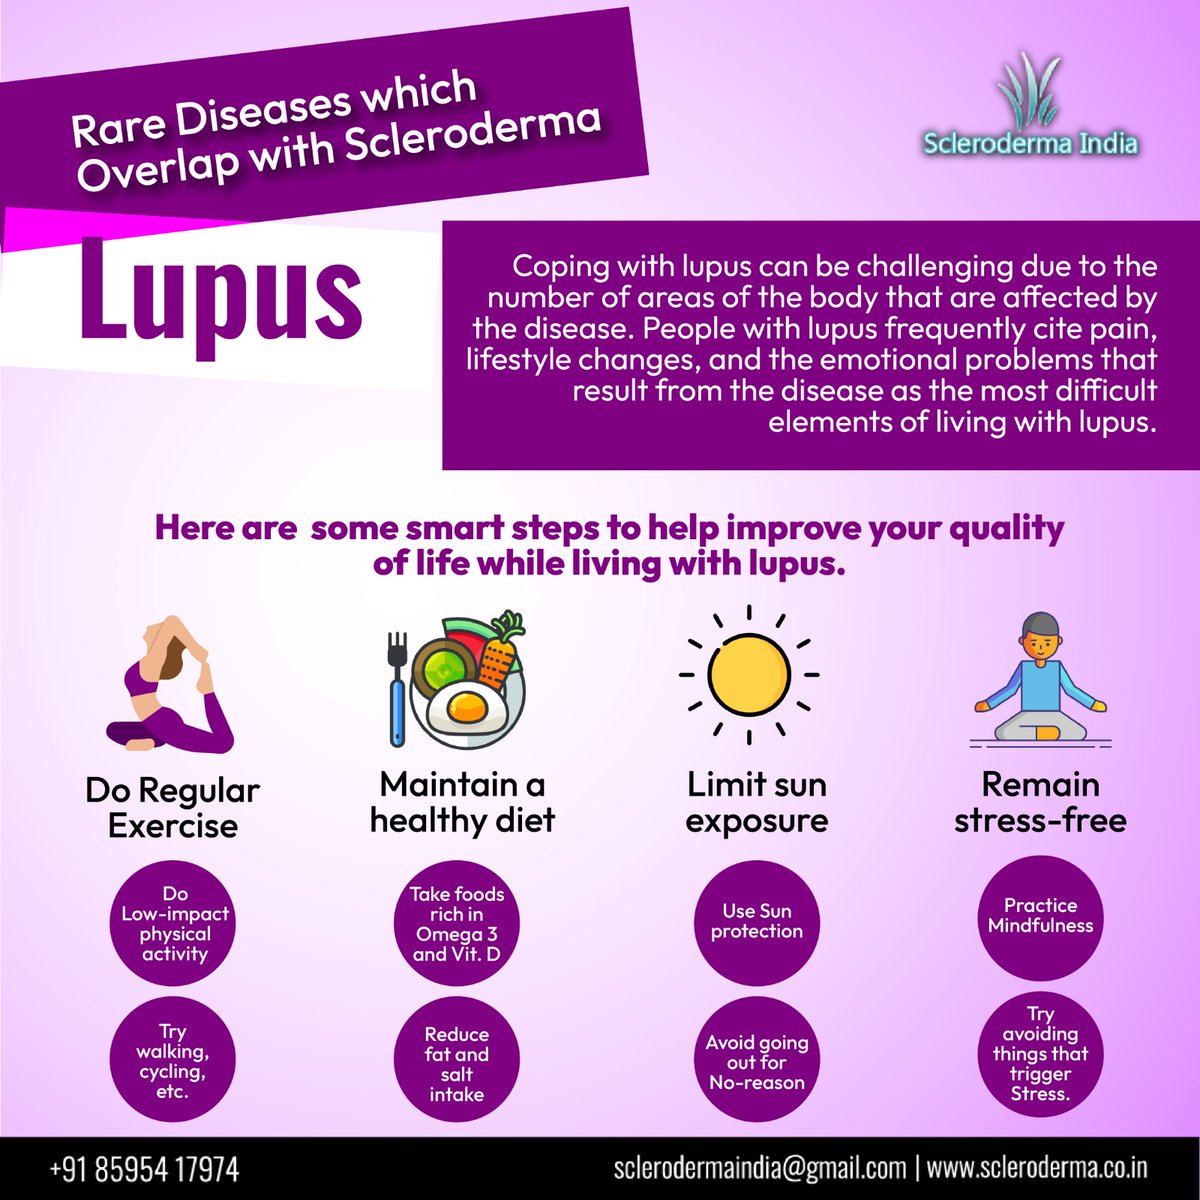 Here are some smart steps to help improve your quality of life while living with lupus.

@lupustrust

#SclerodermaIndia #Scleroderma #SystemicSclerosis #Lupus #lupussymptoms #invisibledisability #invisibleillness #Overlapping